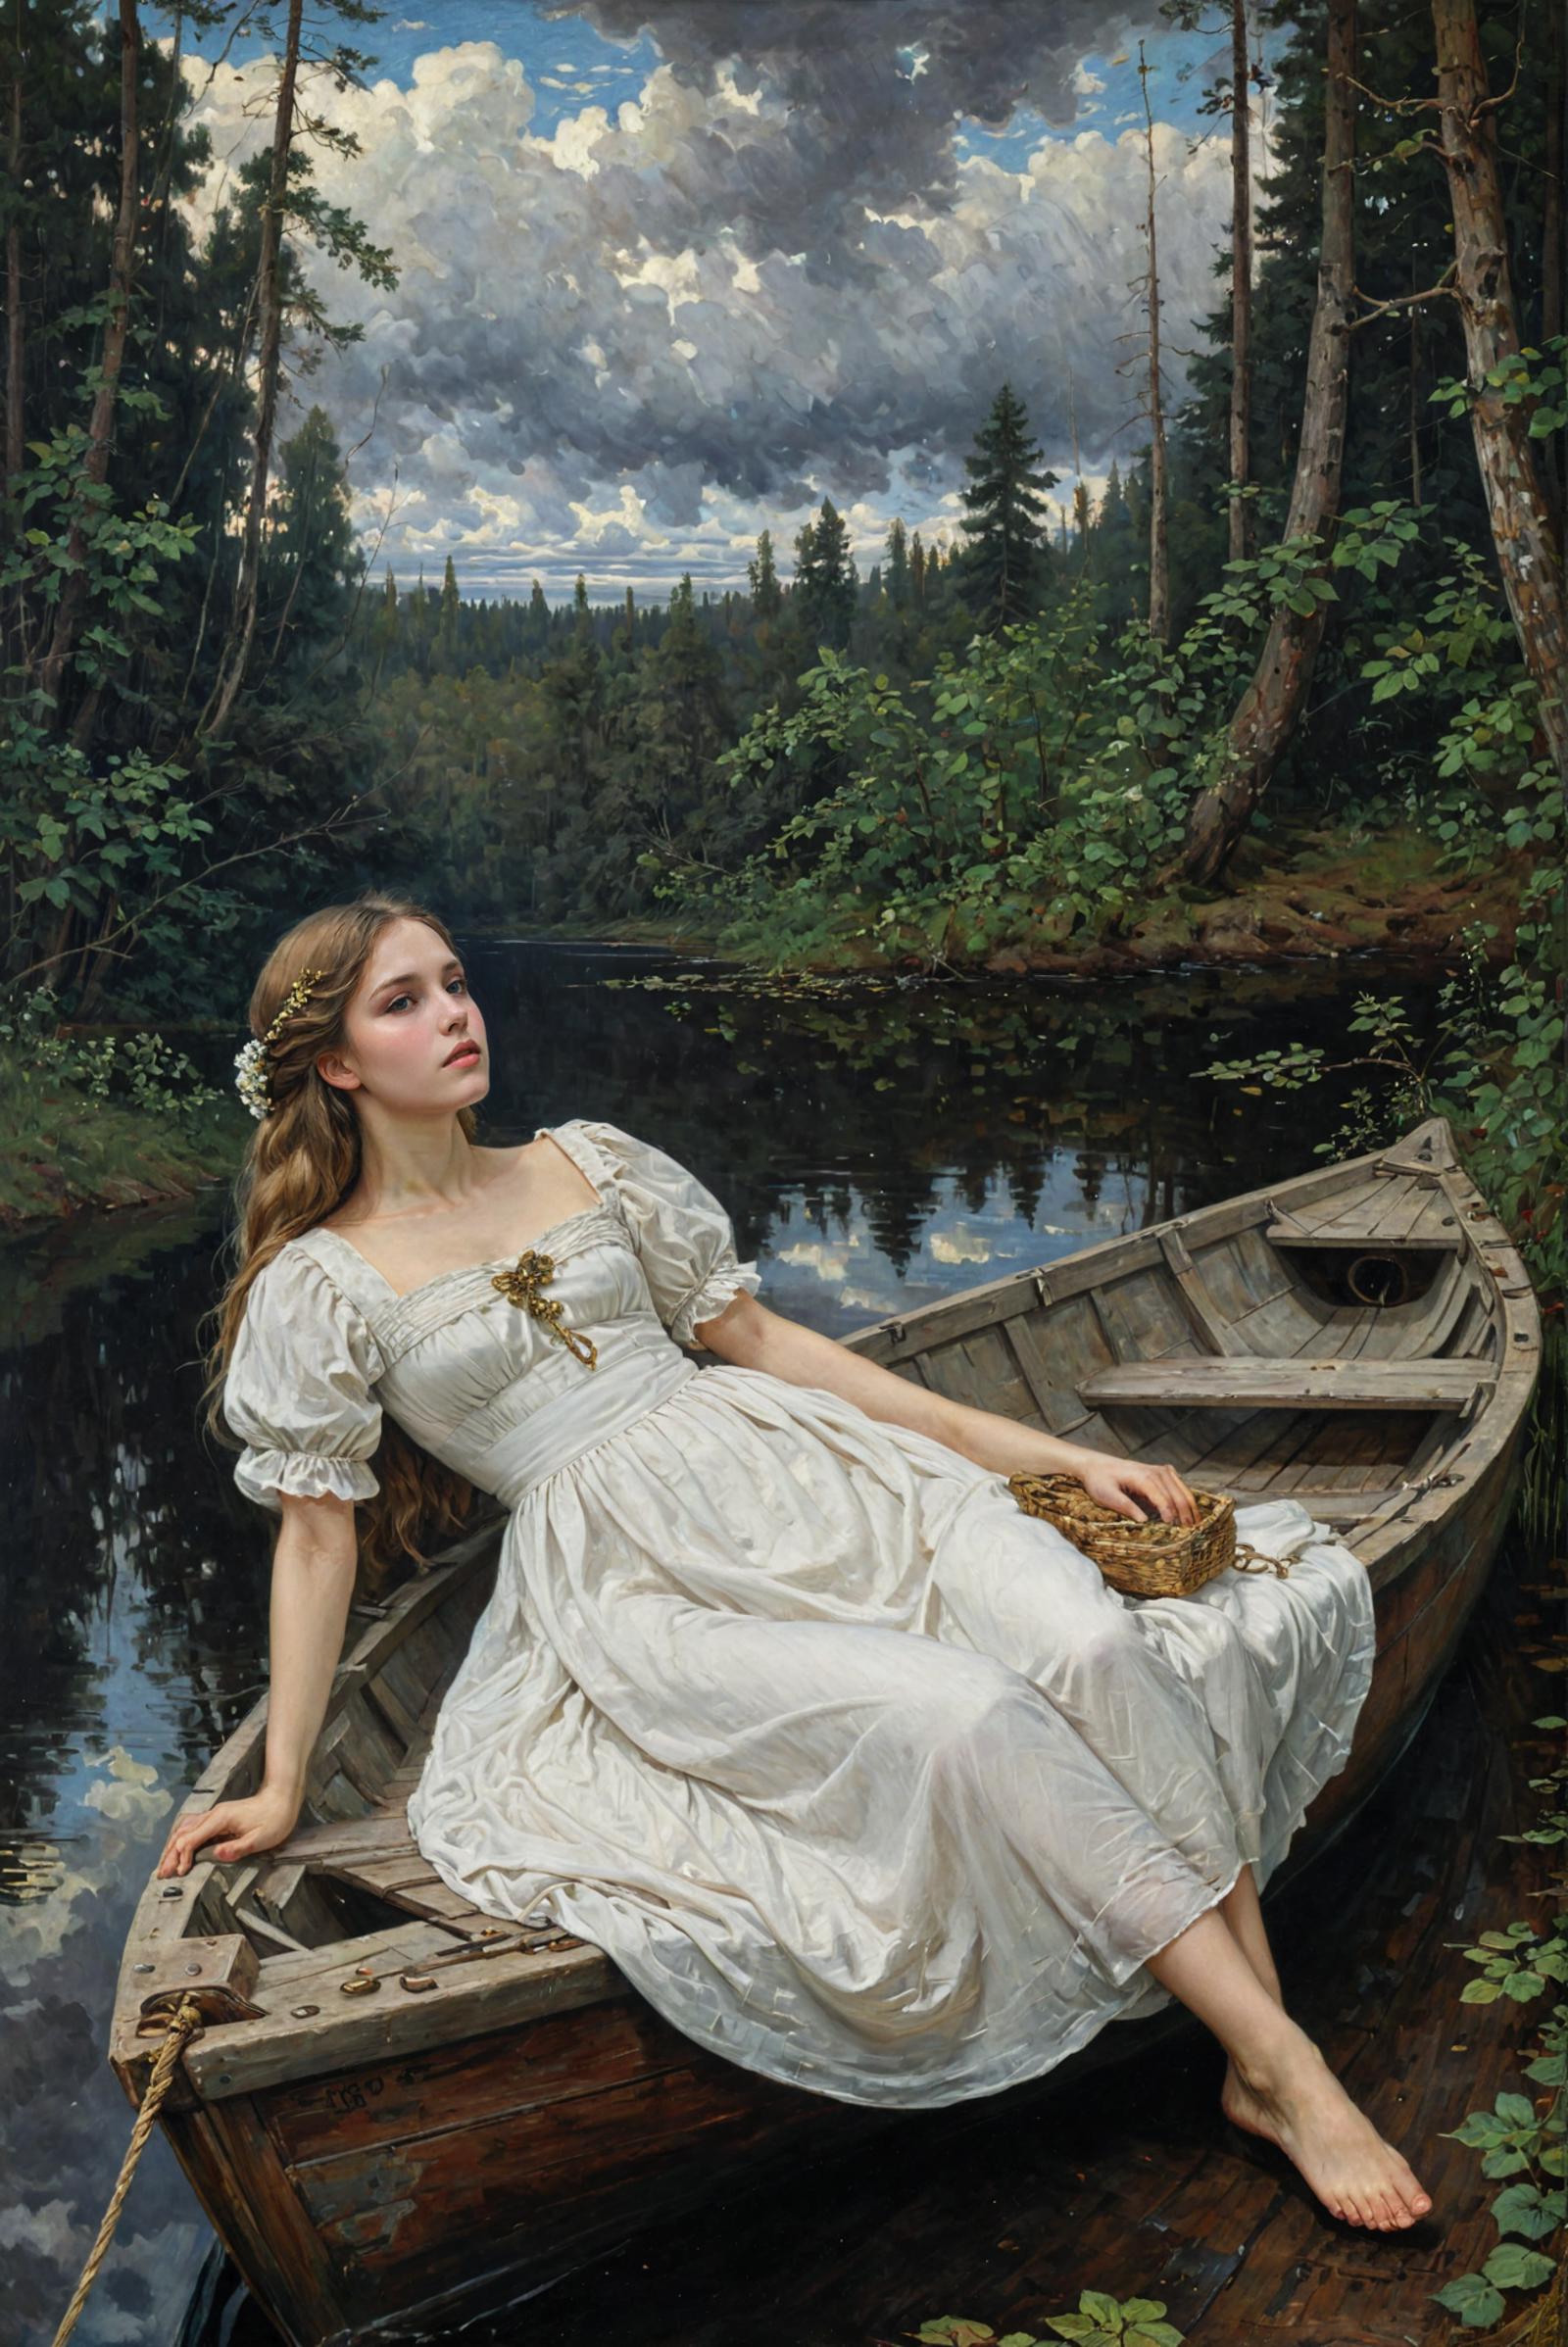 A woman in a white dress sitting in a wooden boat near a forest.